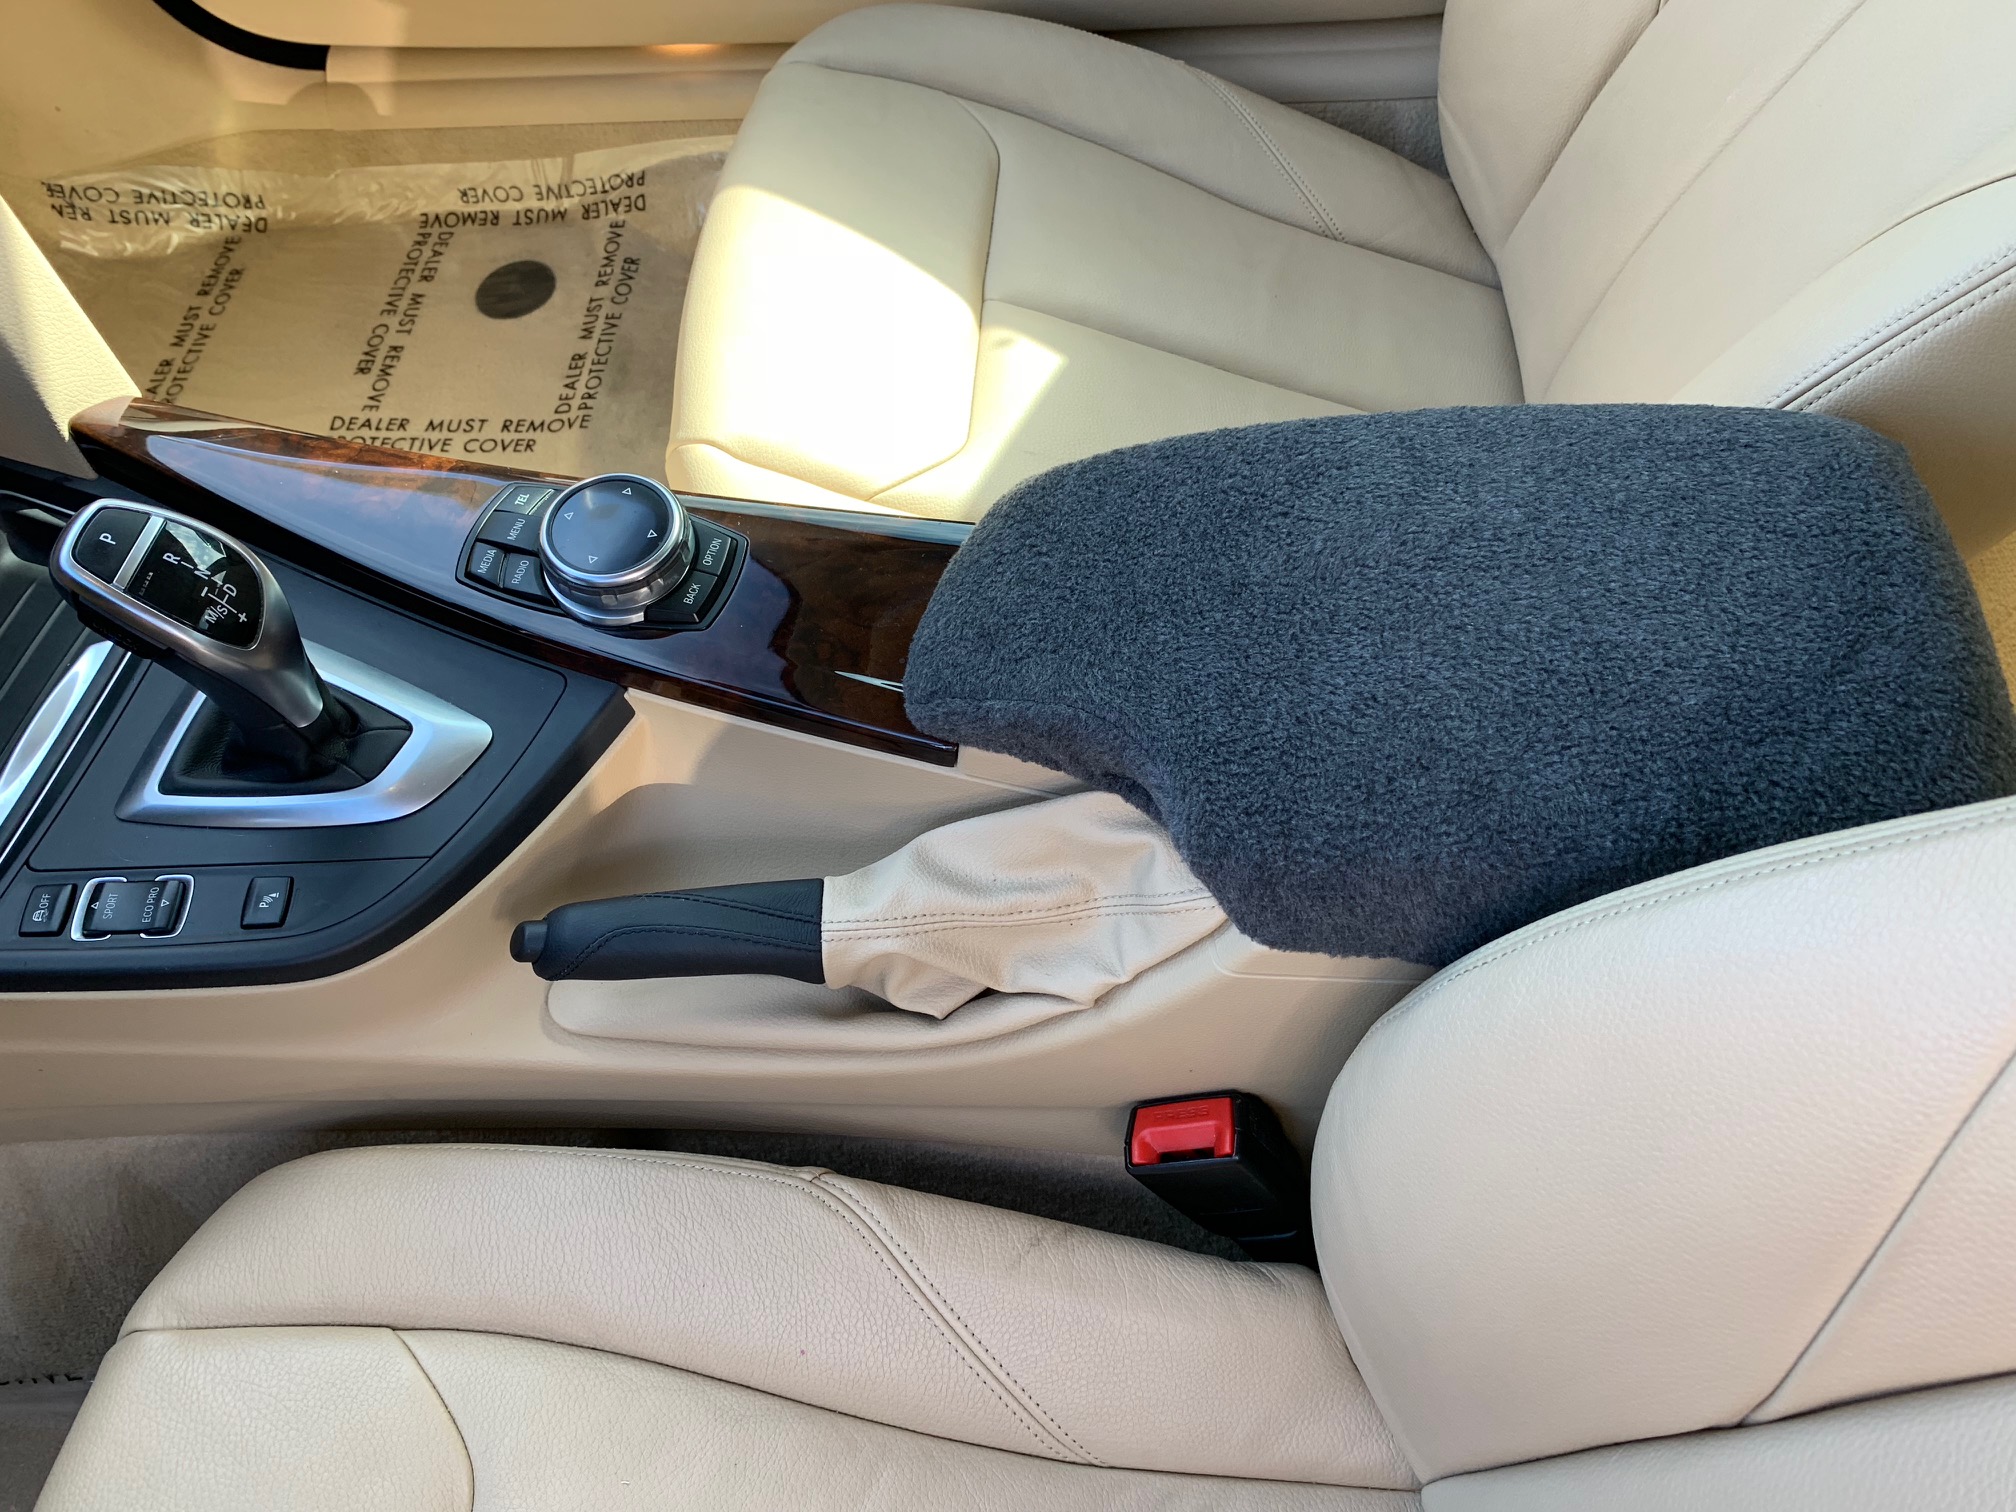 Buy Fleece Center Armrest Console Cover fits the BMW M3 Series 2015-2019 (All Trim Levels)